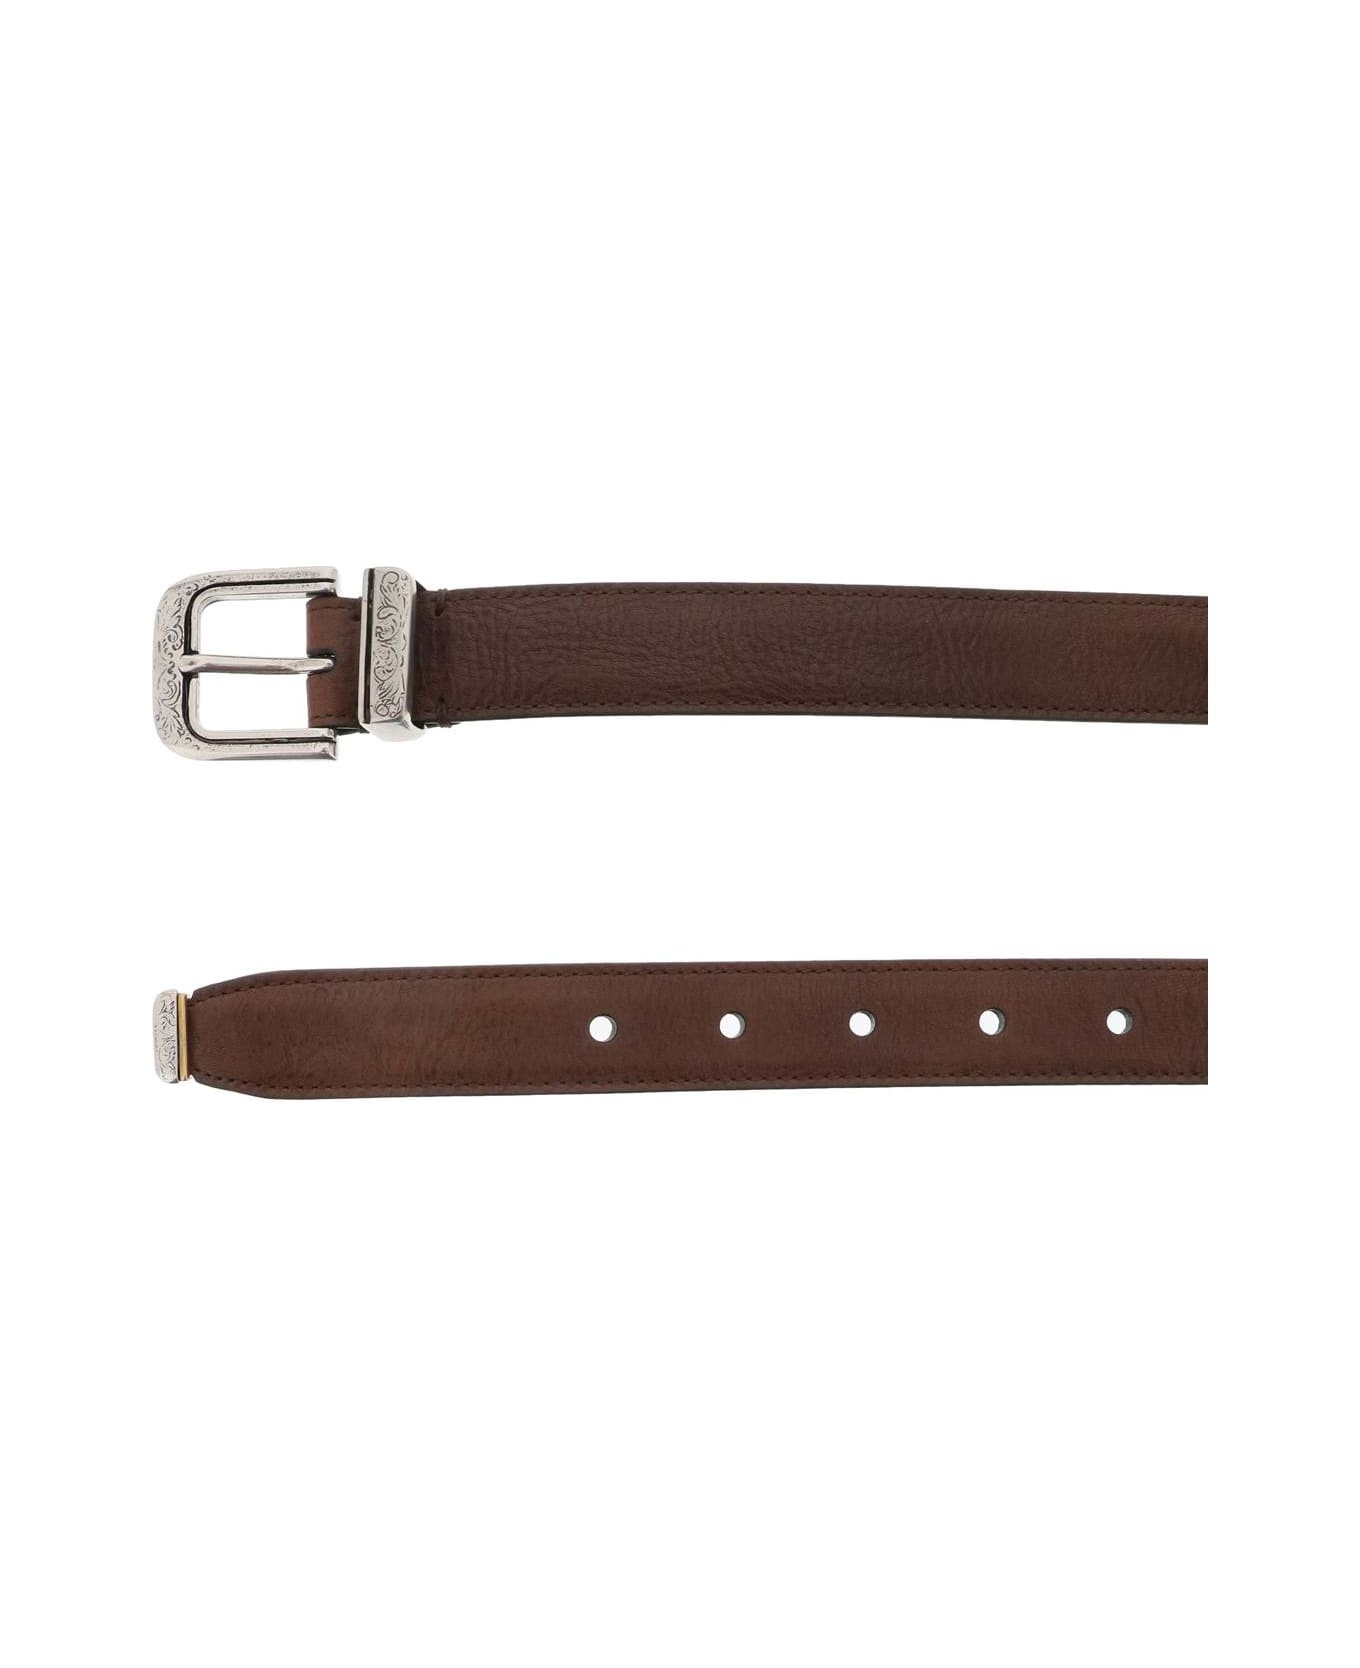 Leather Belt With Detailed Buckle - 2